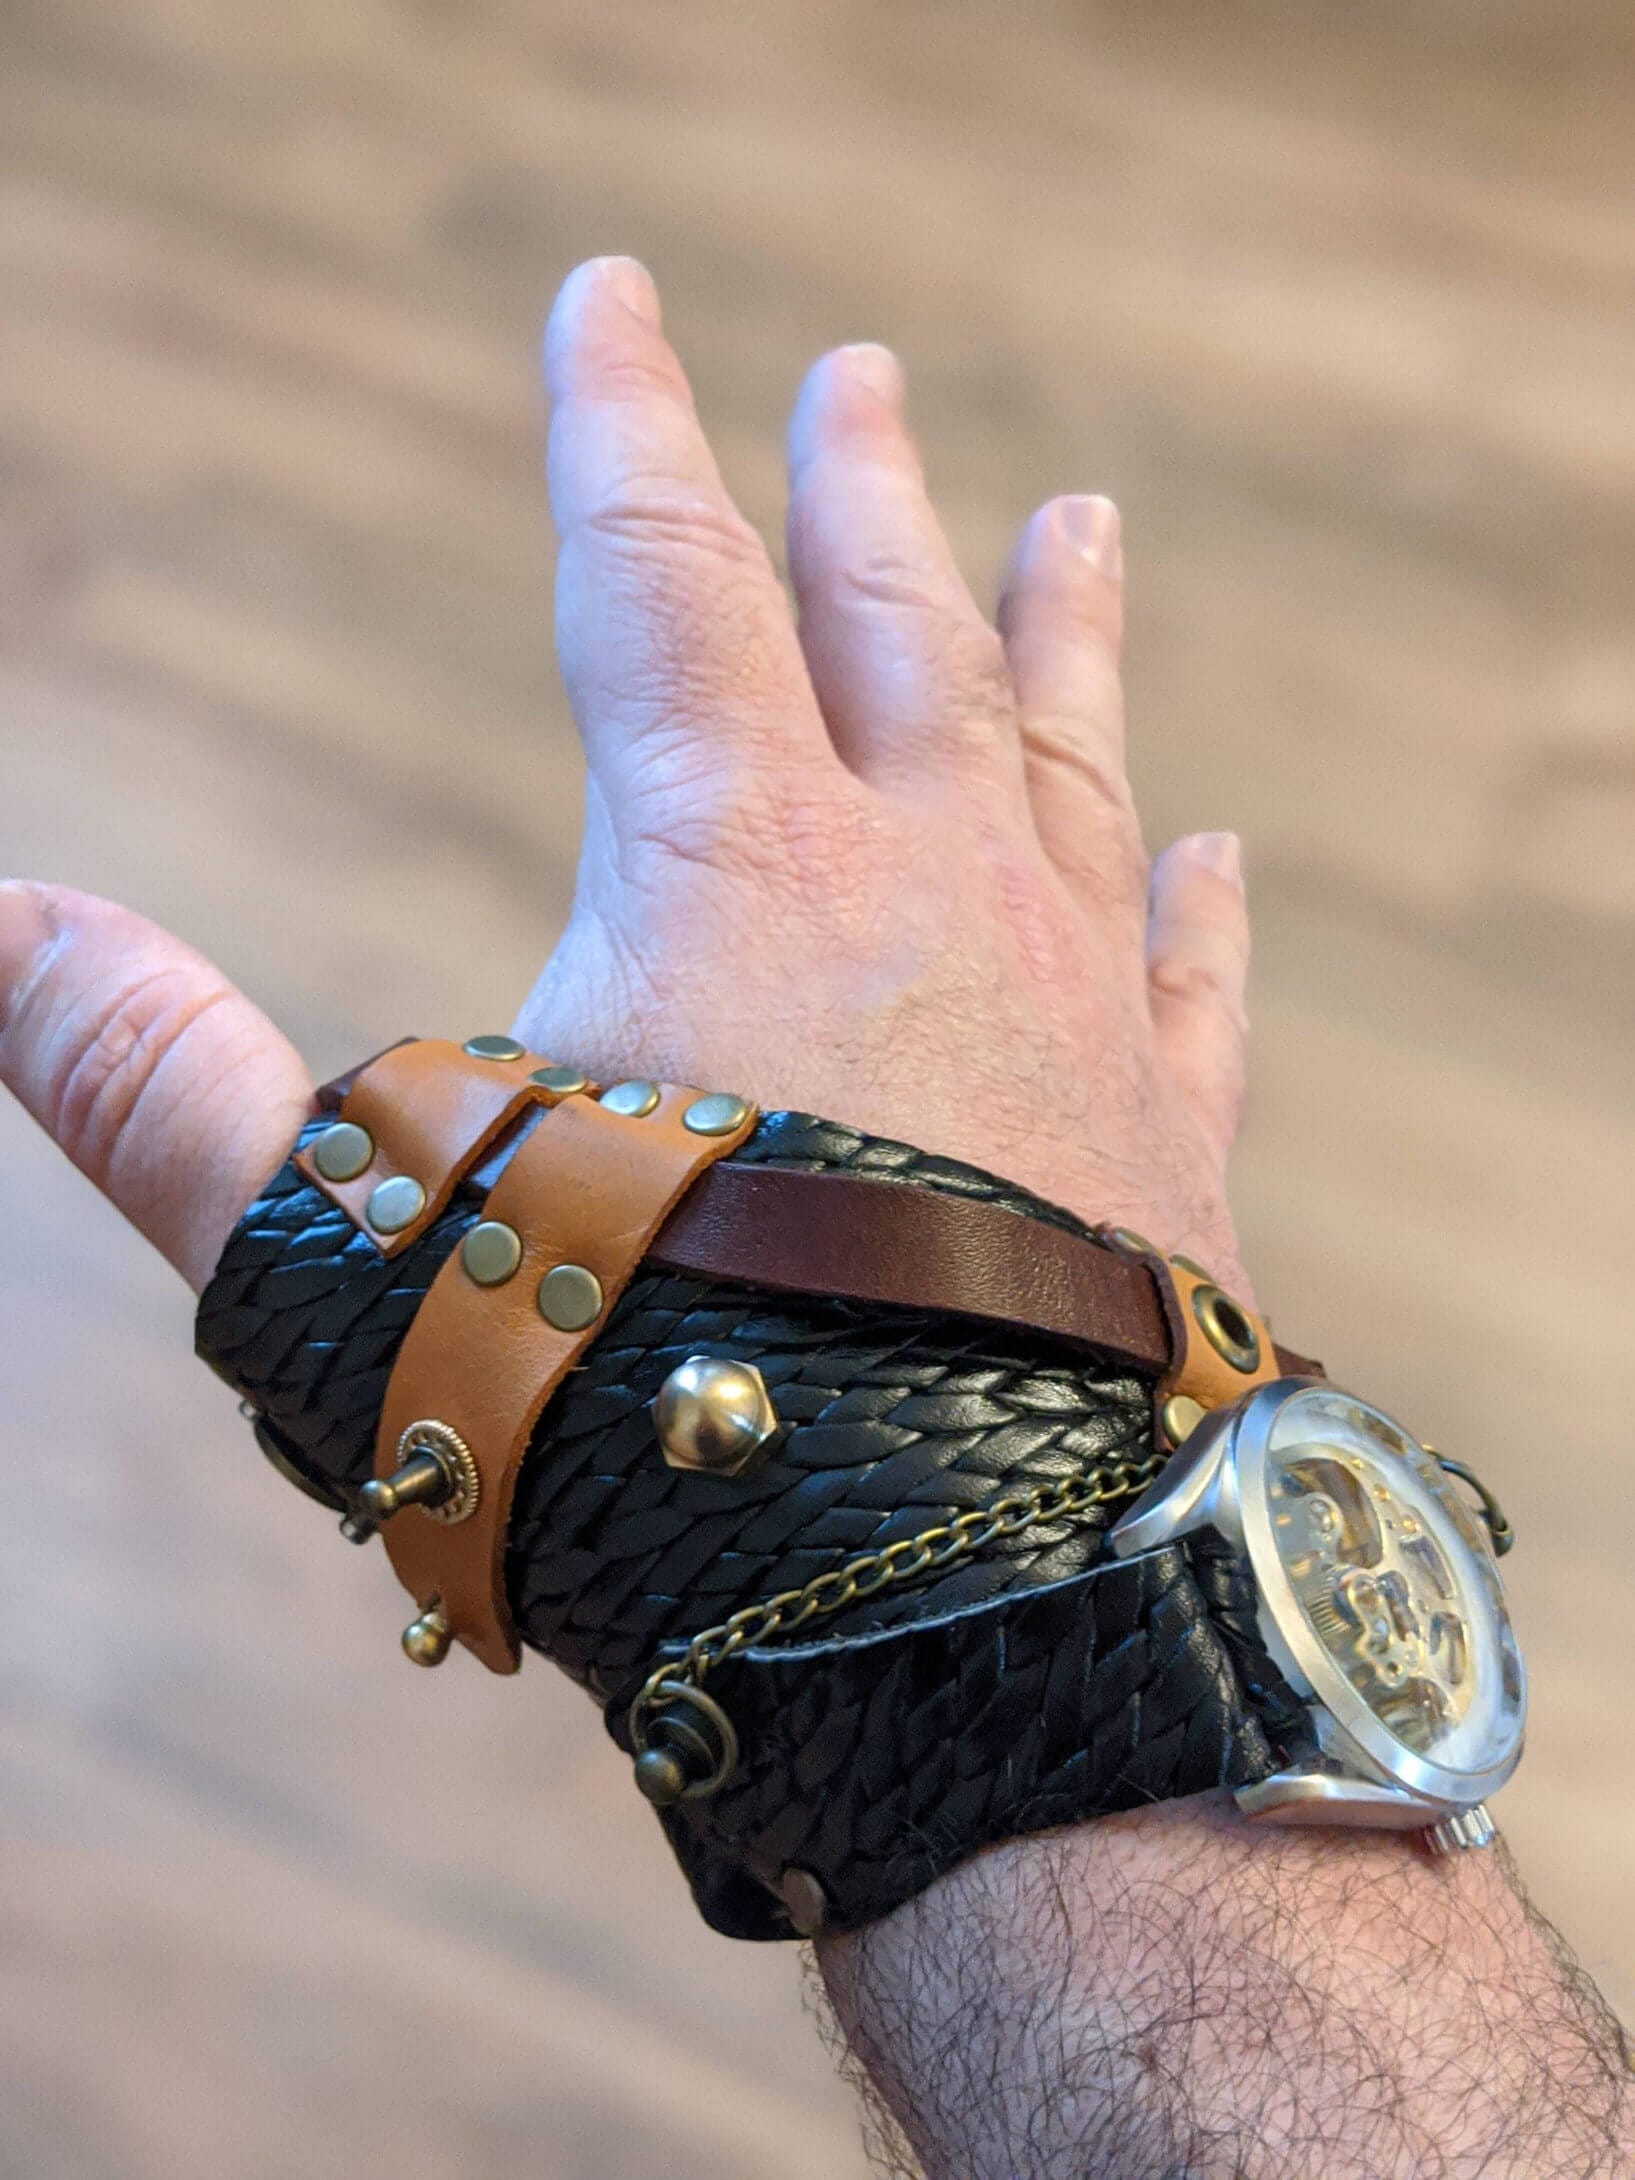 Chained Centered Metal Hand Wristband, Leather Rock Punk bracelet, Stylish  Rockstar accessories